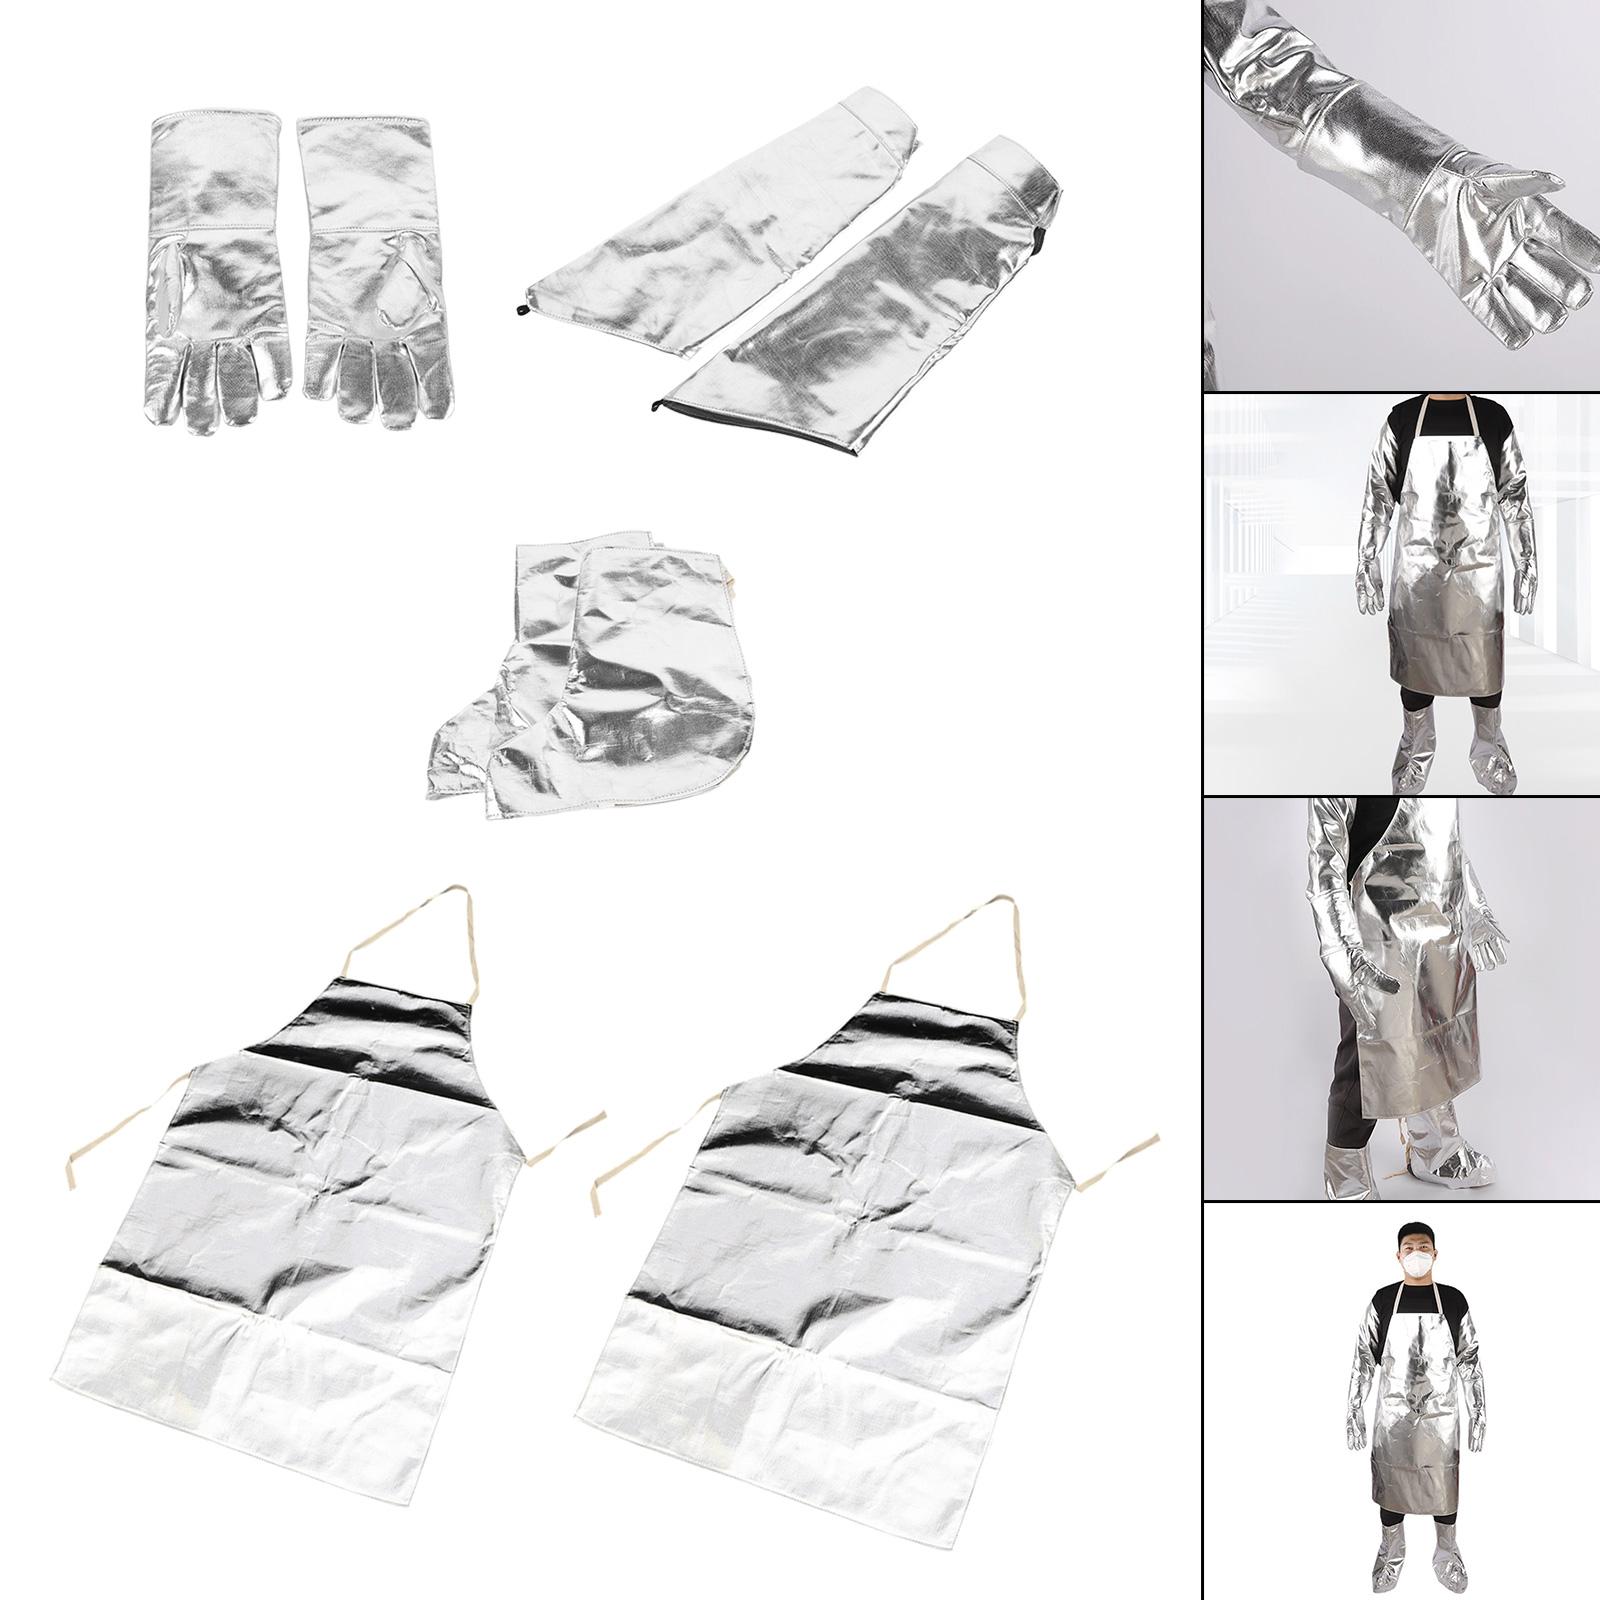 2 Pieces Aluminum Foil Aprons Foot Guards for Fish Cleaning lab Work gloves